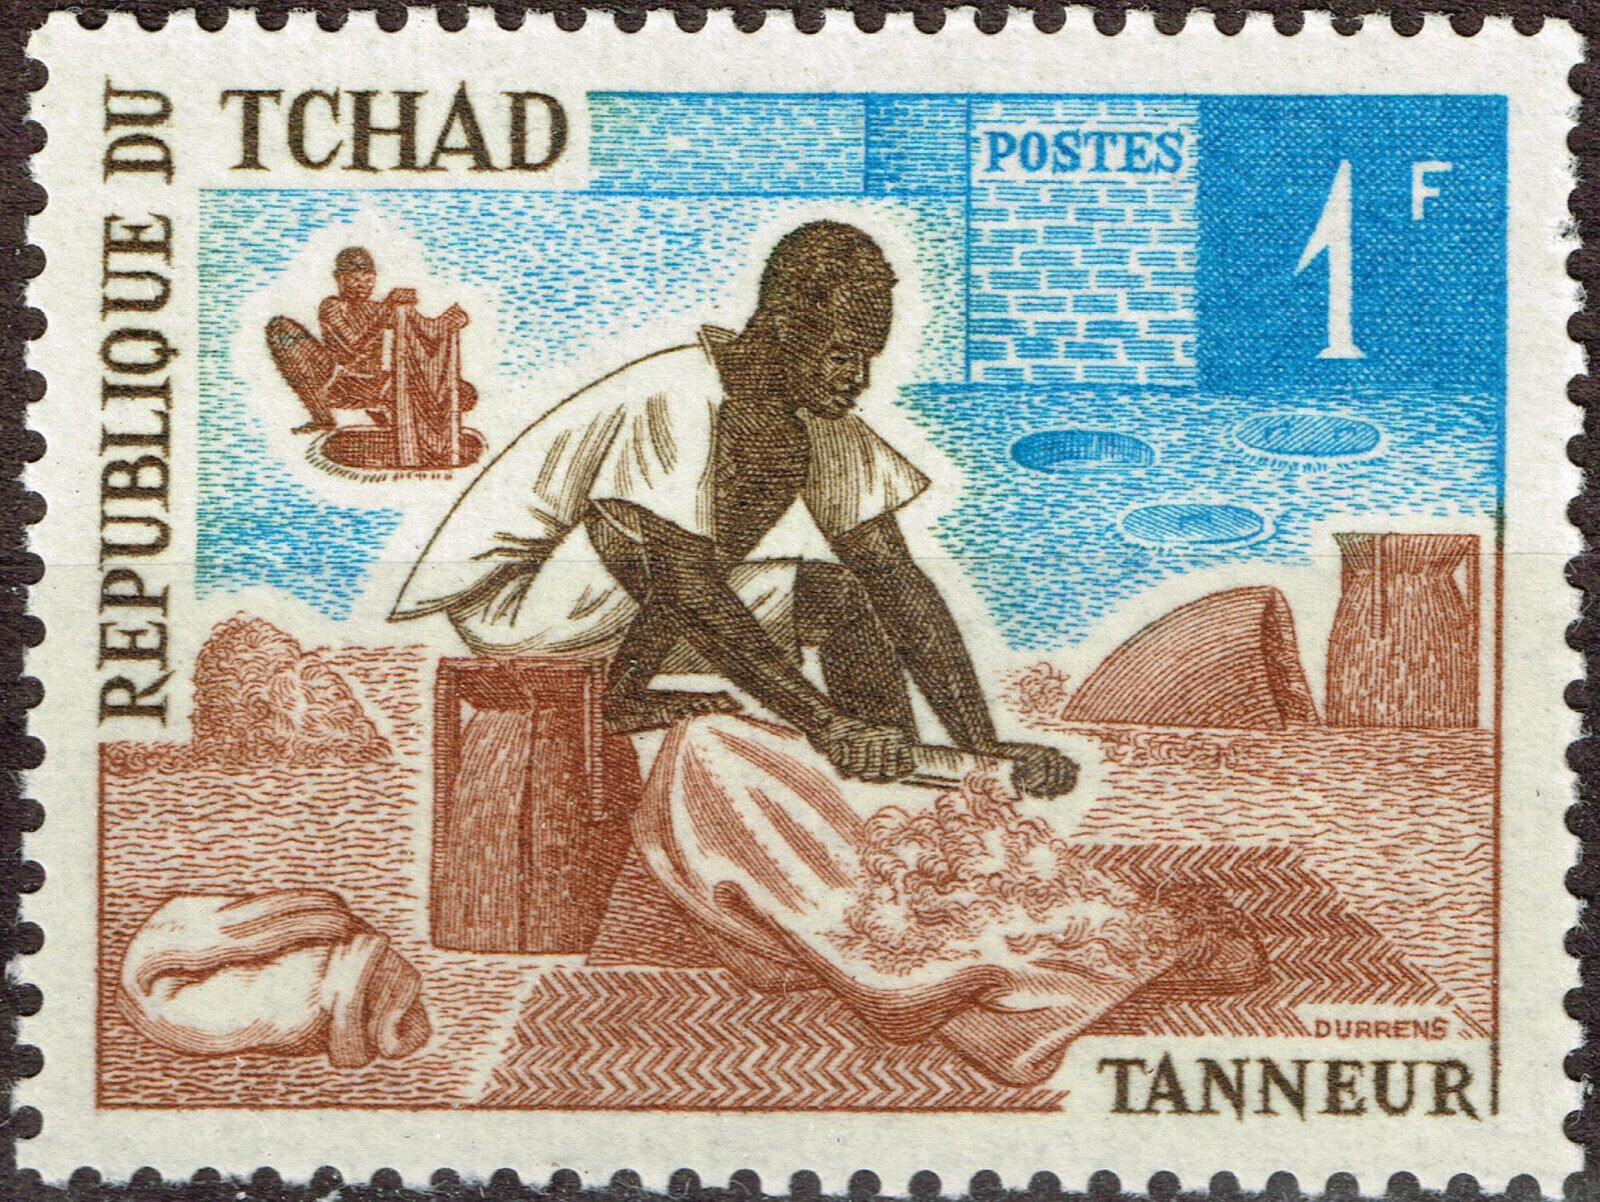 Tchad Ethnicities Culture stamp 1972 MNH